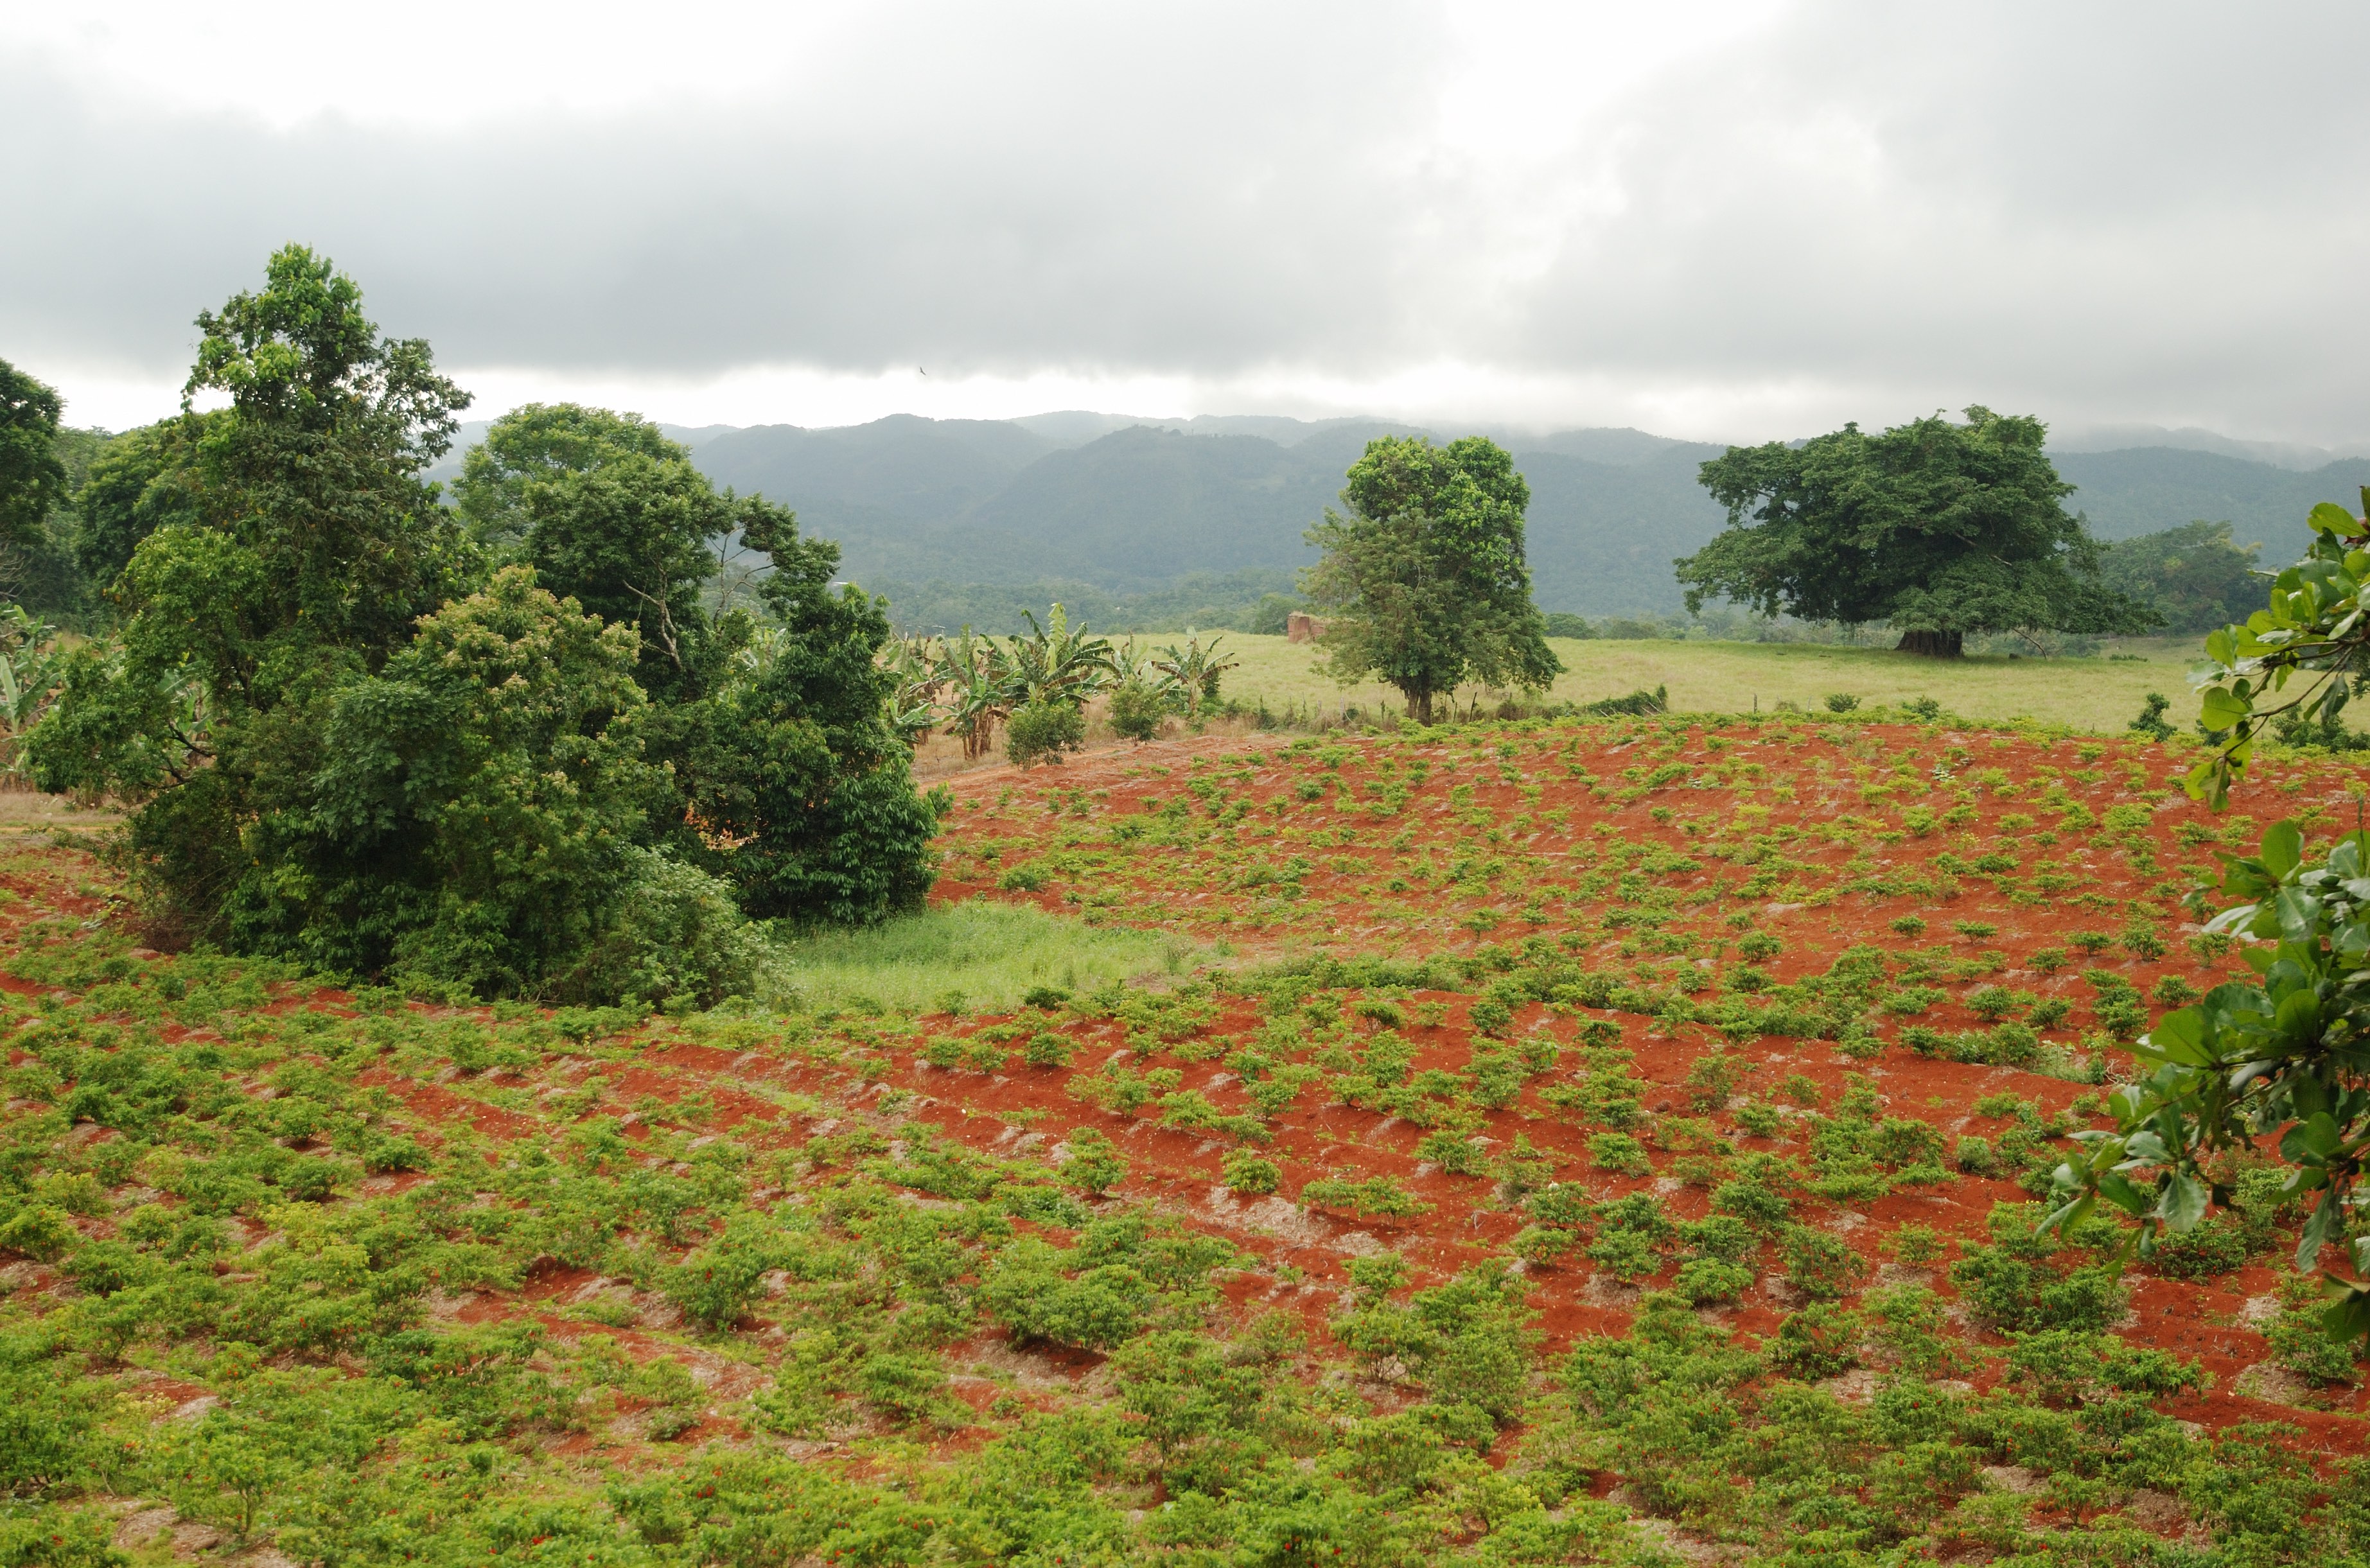 Agriculture field in Jamaica